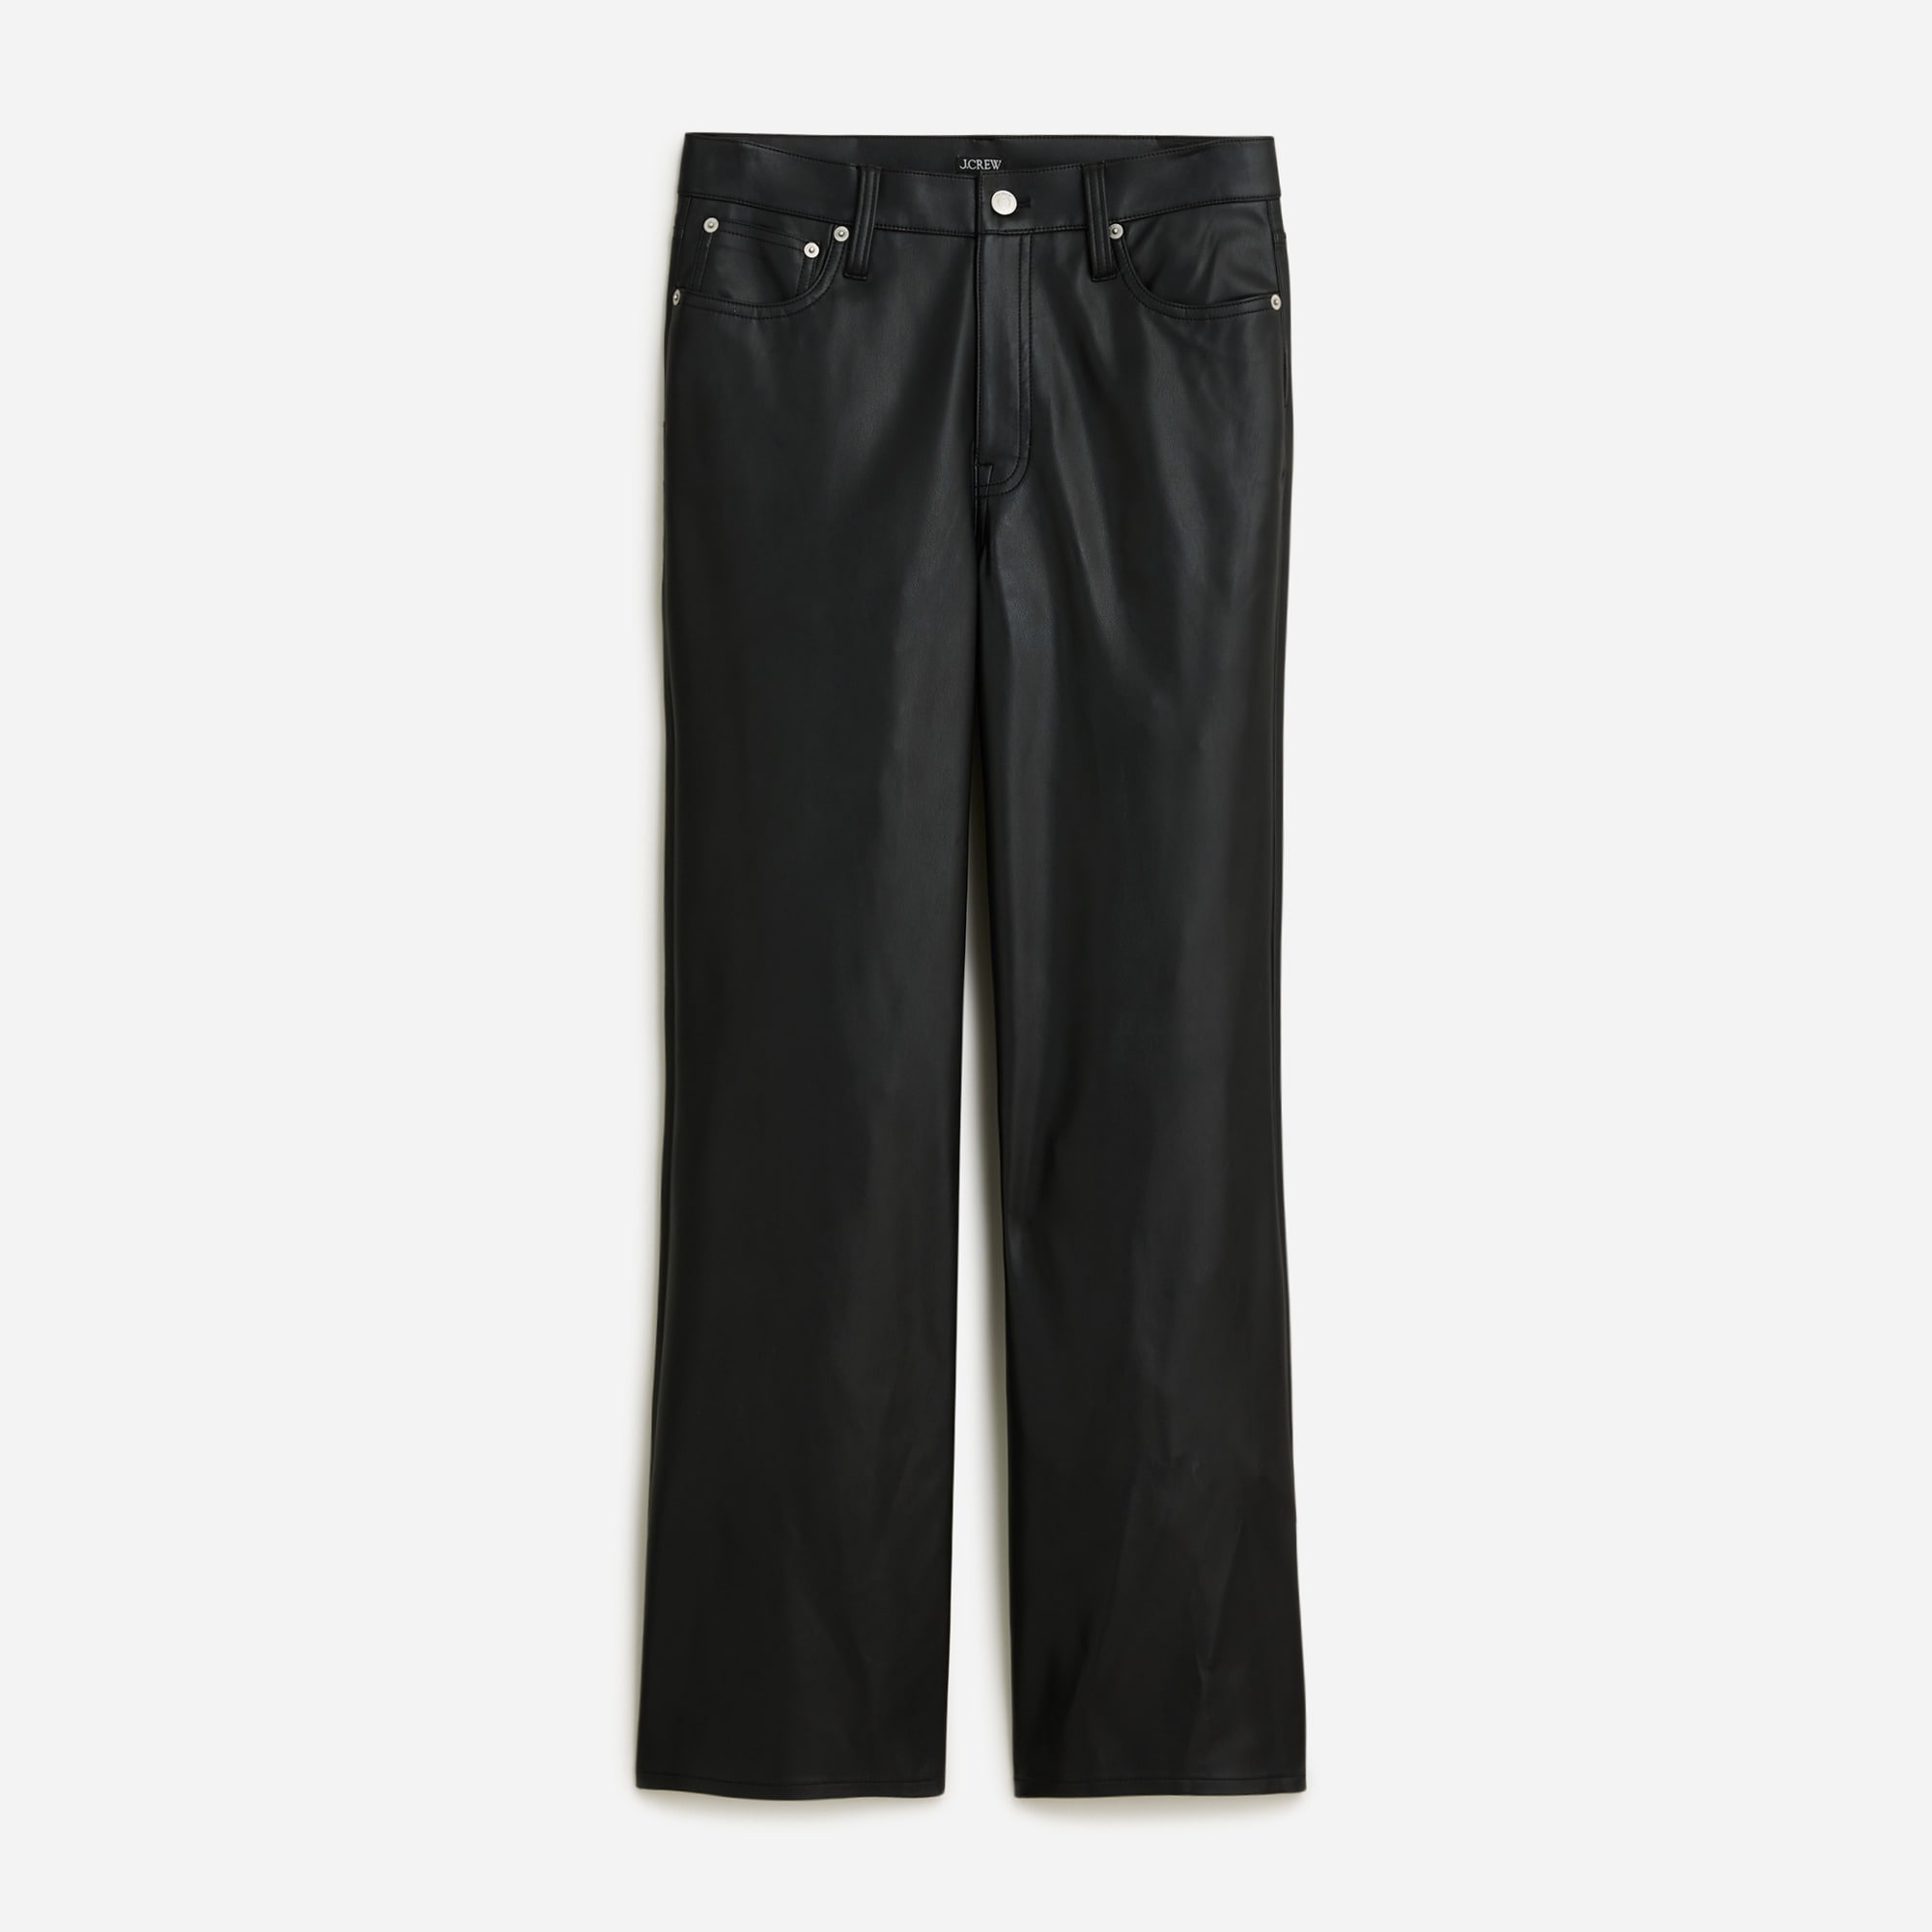  Tall slim wide-leg pant in faux leather